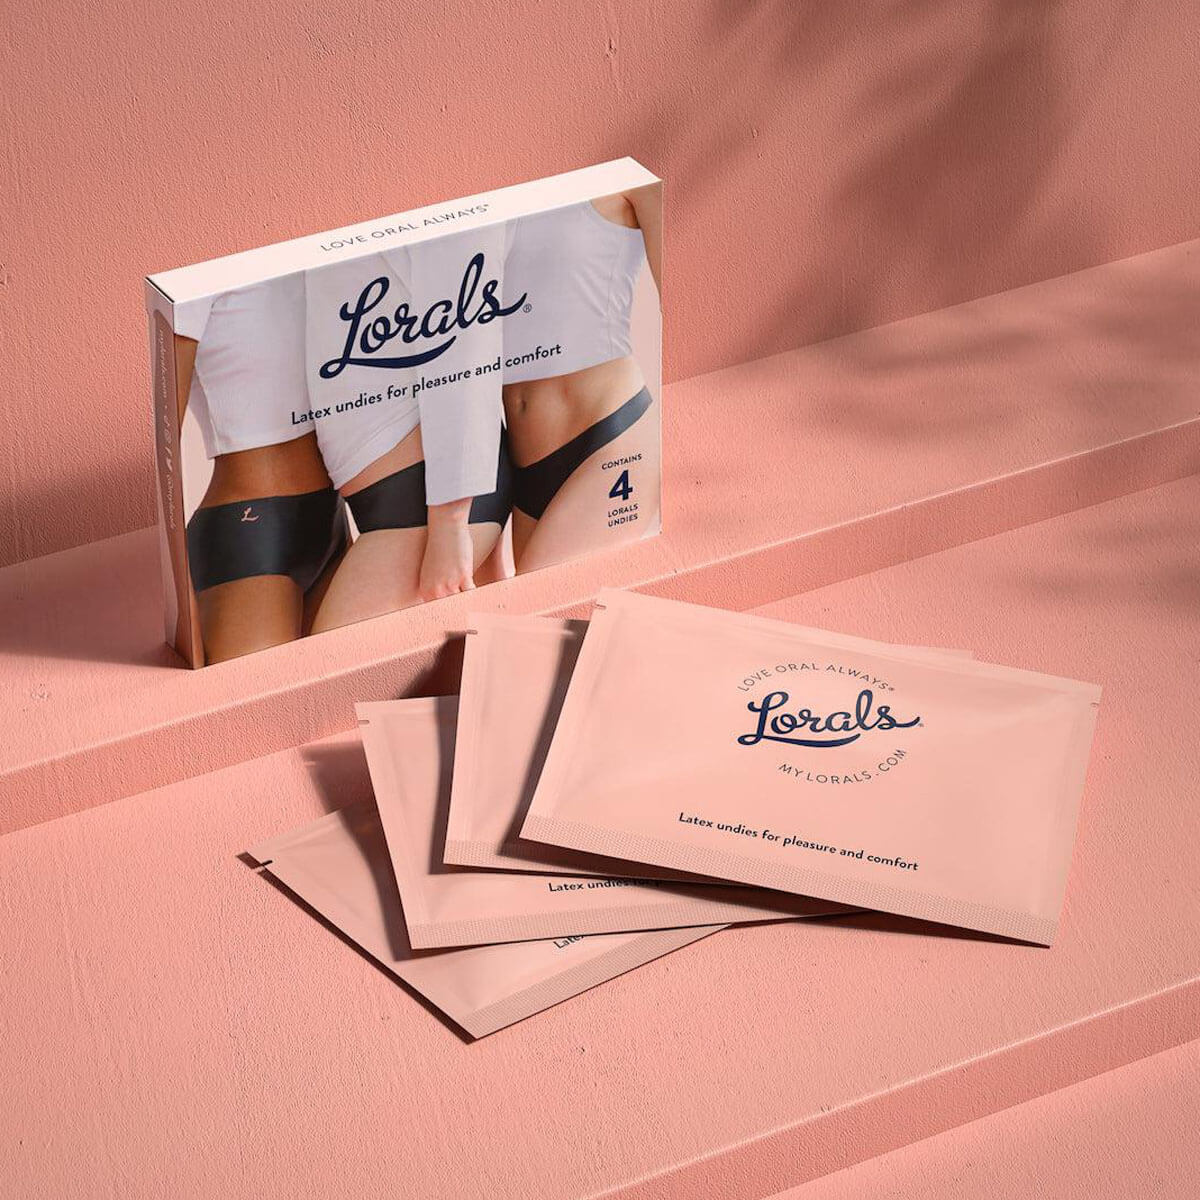 Pack of Lorals and 4 individually wrapped latex undies Nudie Co